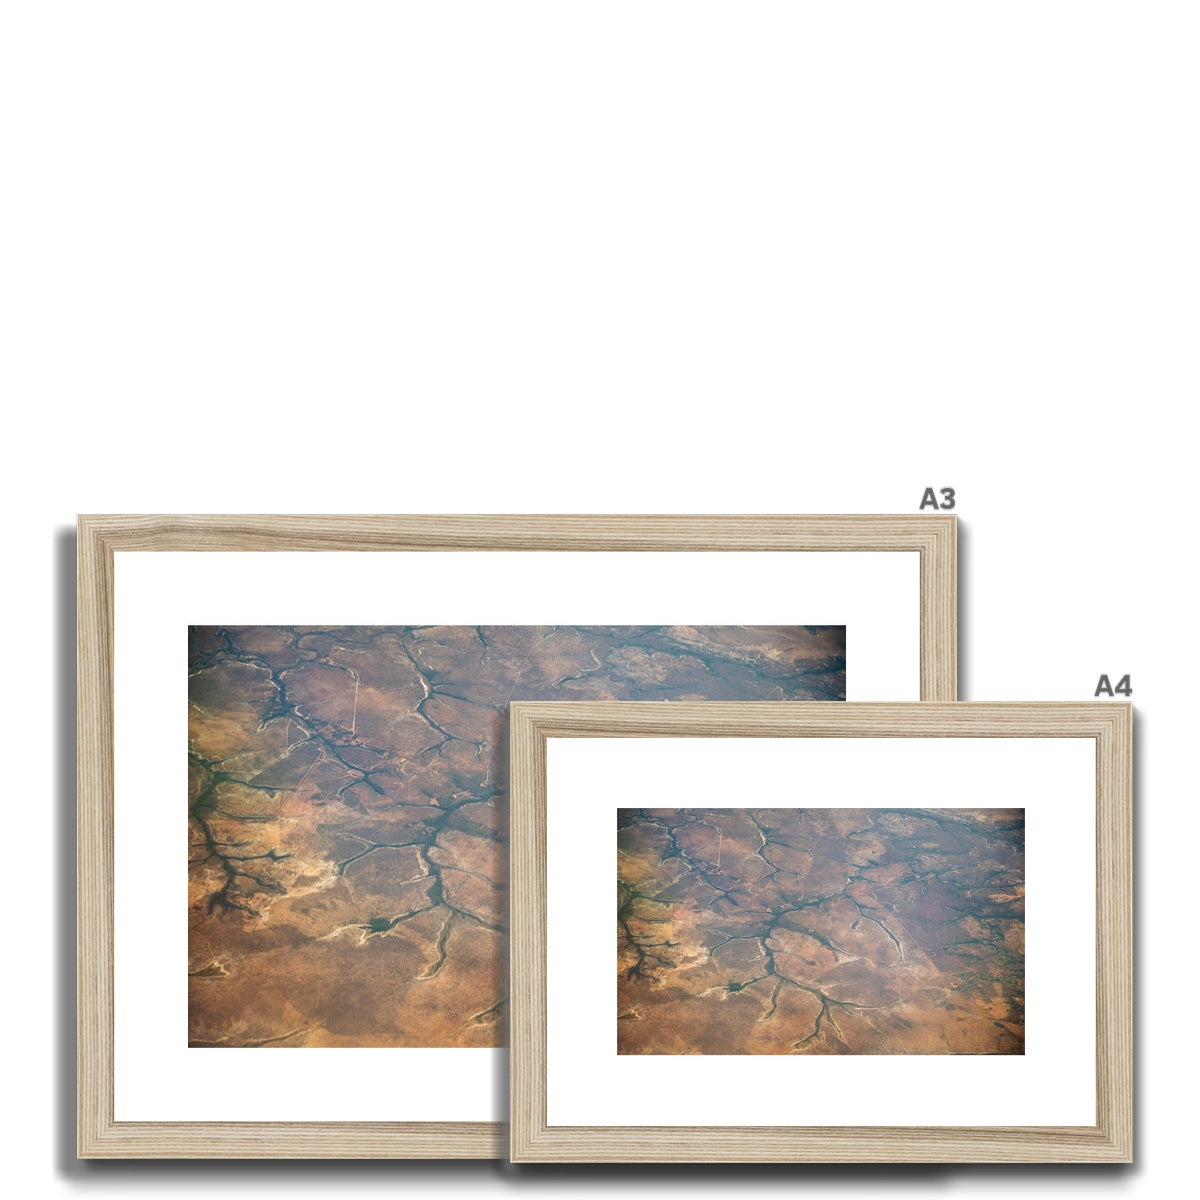 Amazonas after the fires Framed & Mounted Print